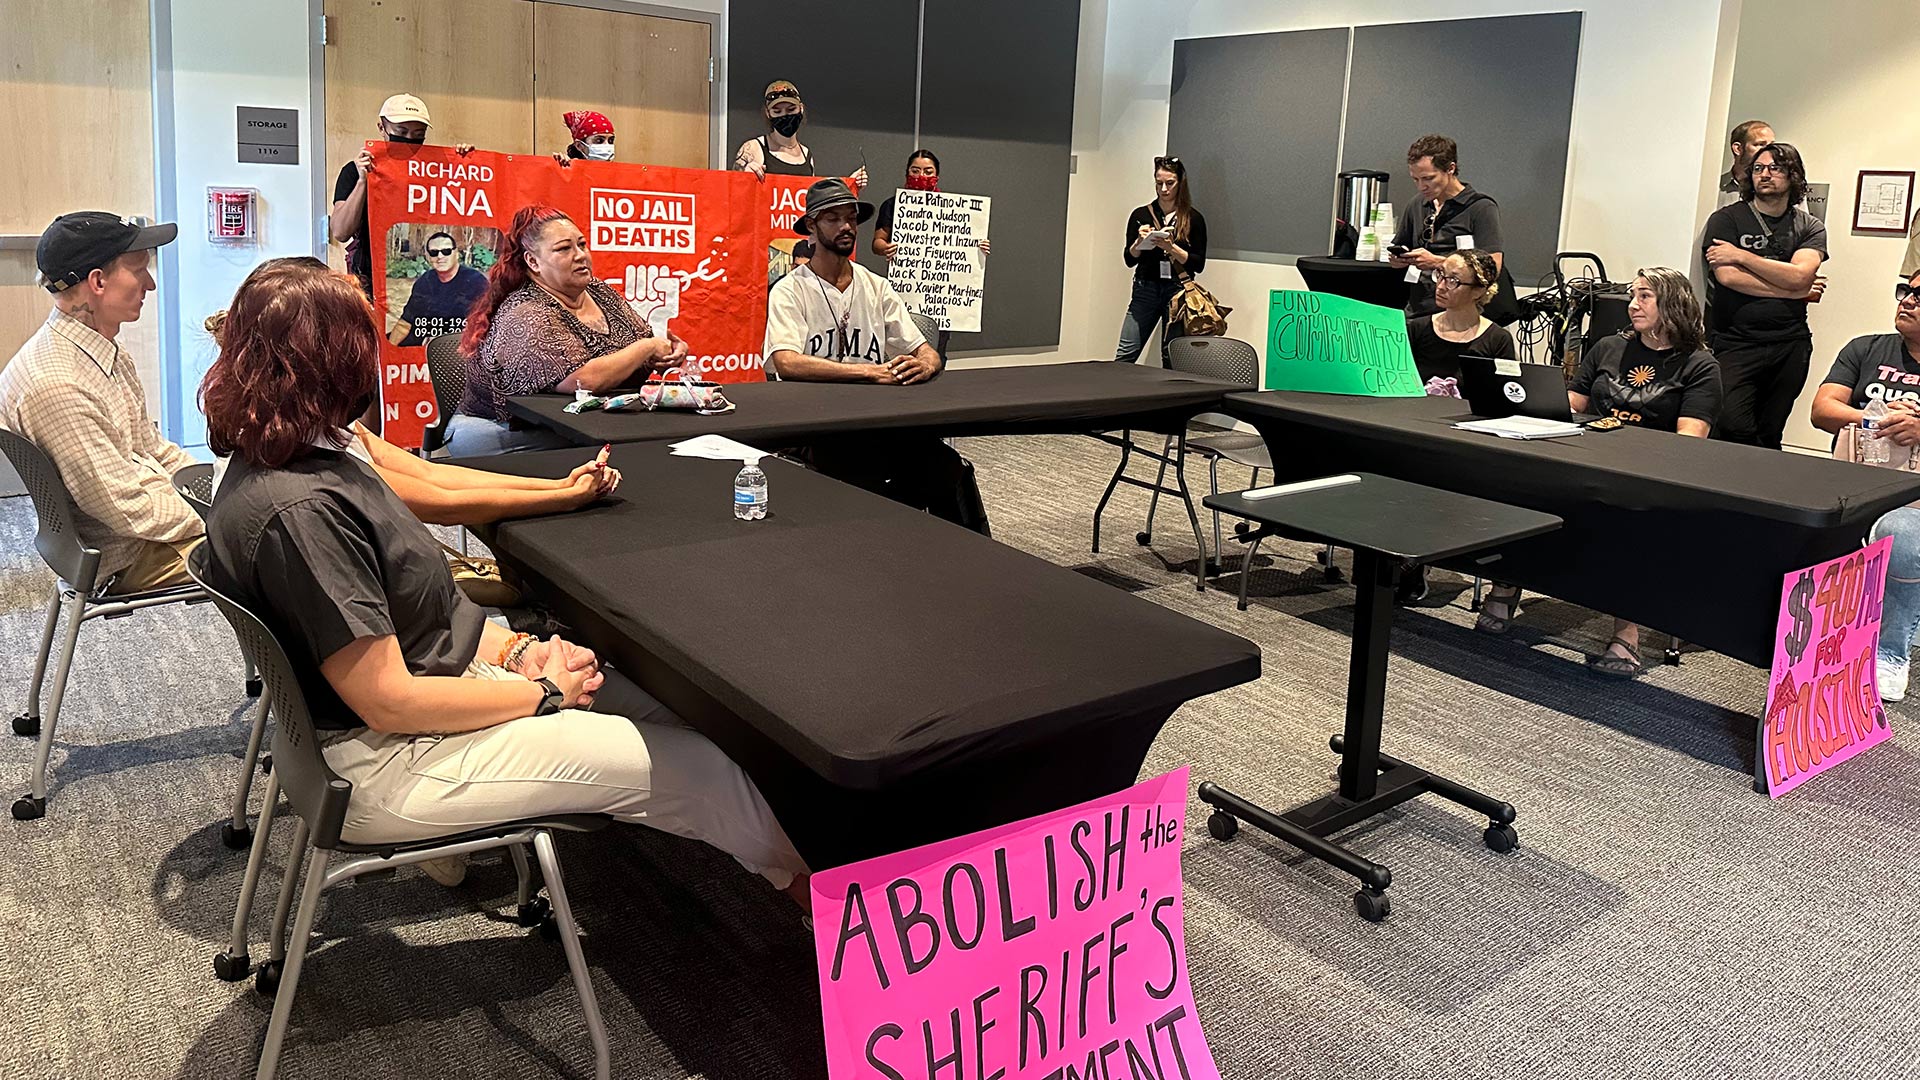 A local advocacy group, No Jail Deaths, continues a public meeting after the Pima County Adult Detention Center Blue Ribbon Commission decided to end the meeting due to disruption from the protestors on Thursday, Aug. 10, 2023 at the Pima County Historic Courthouse.